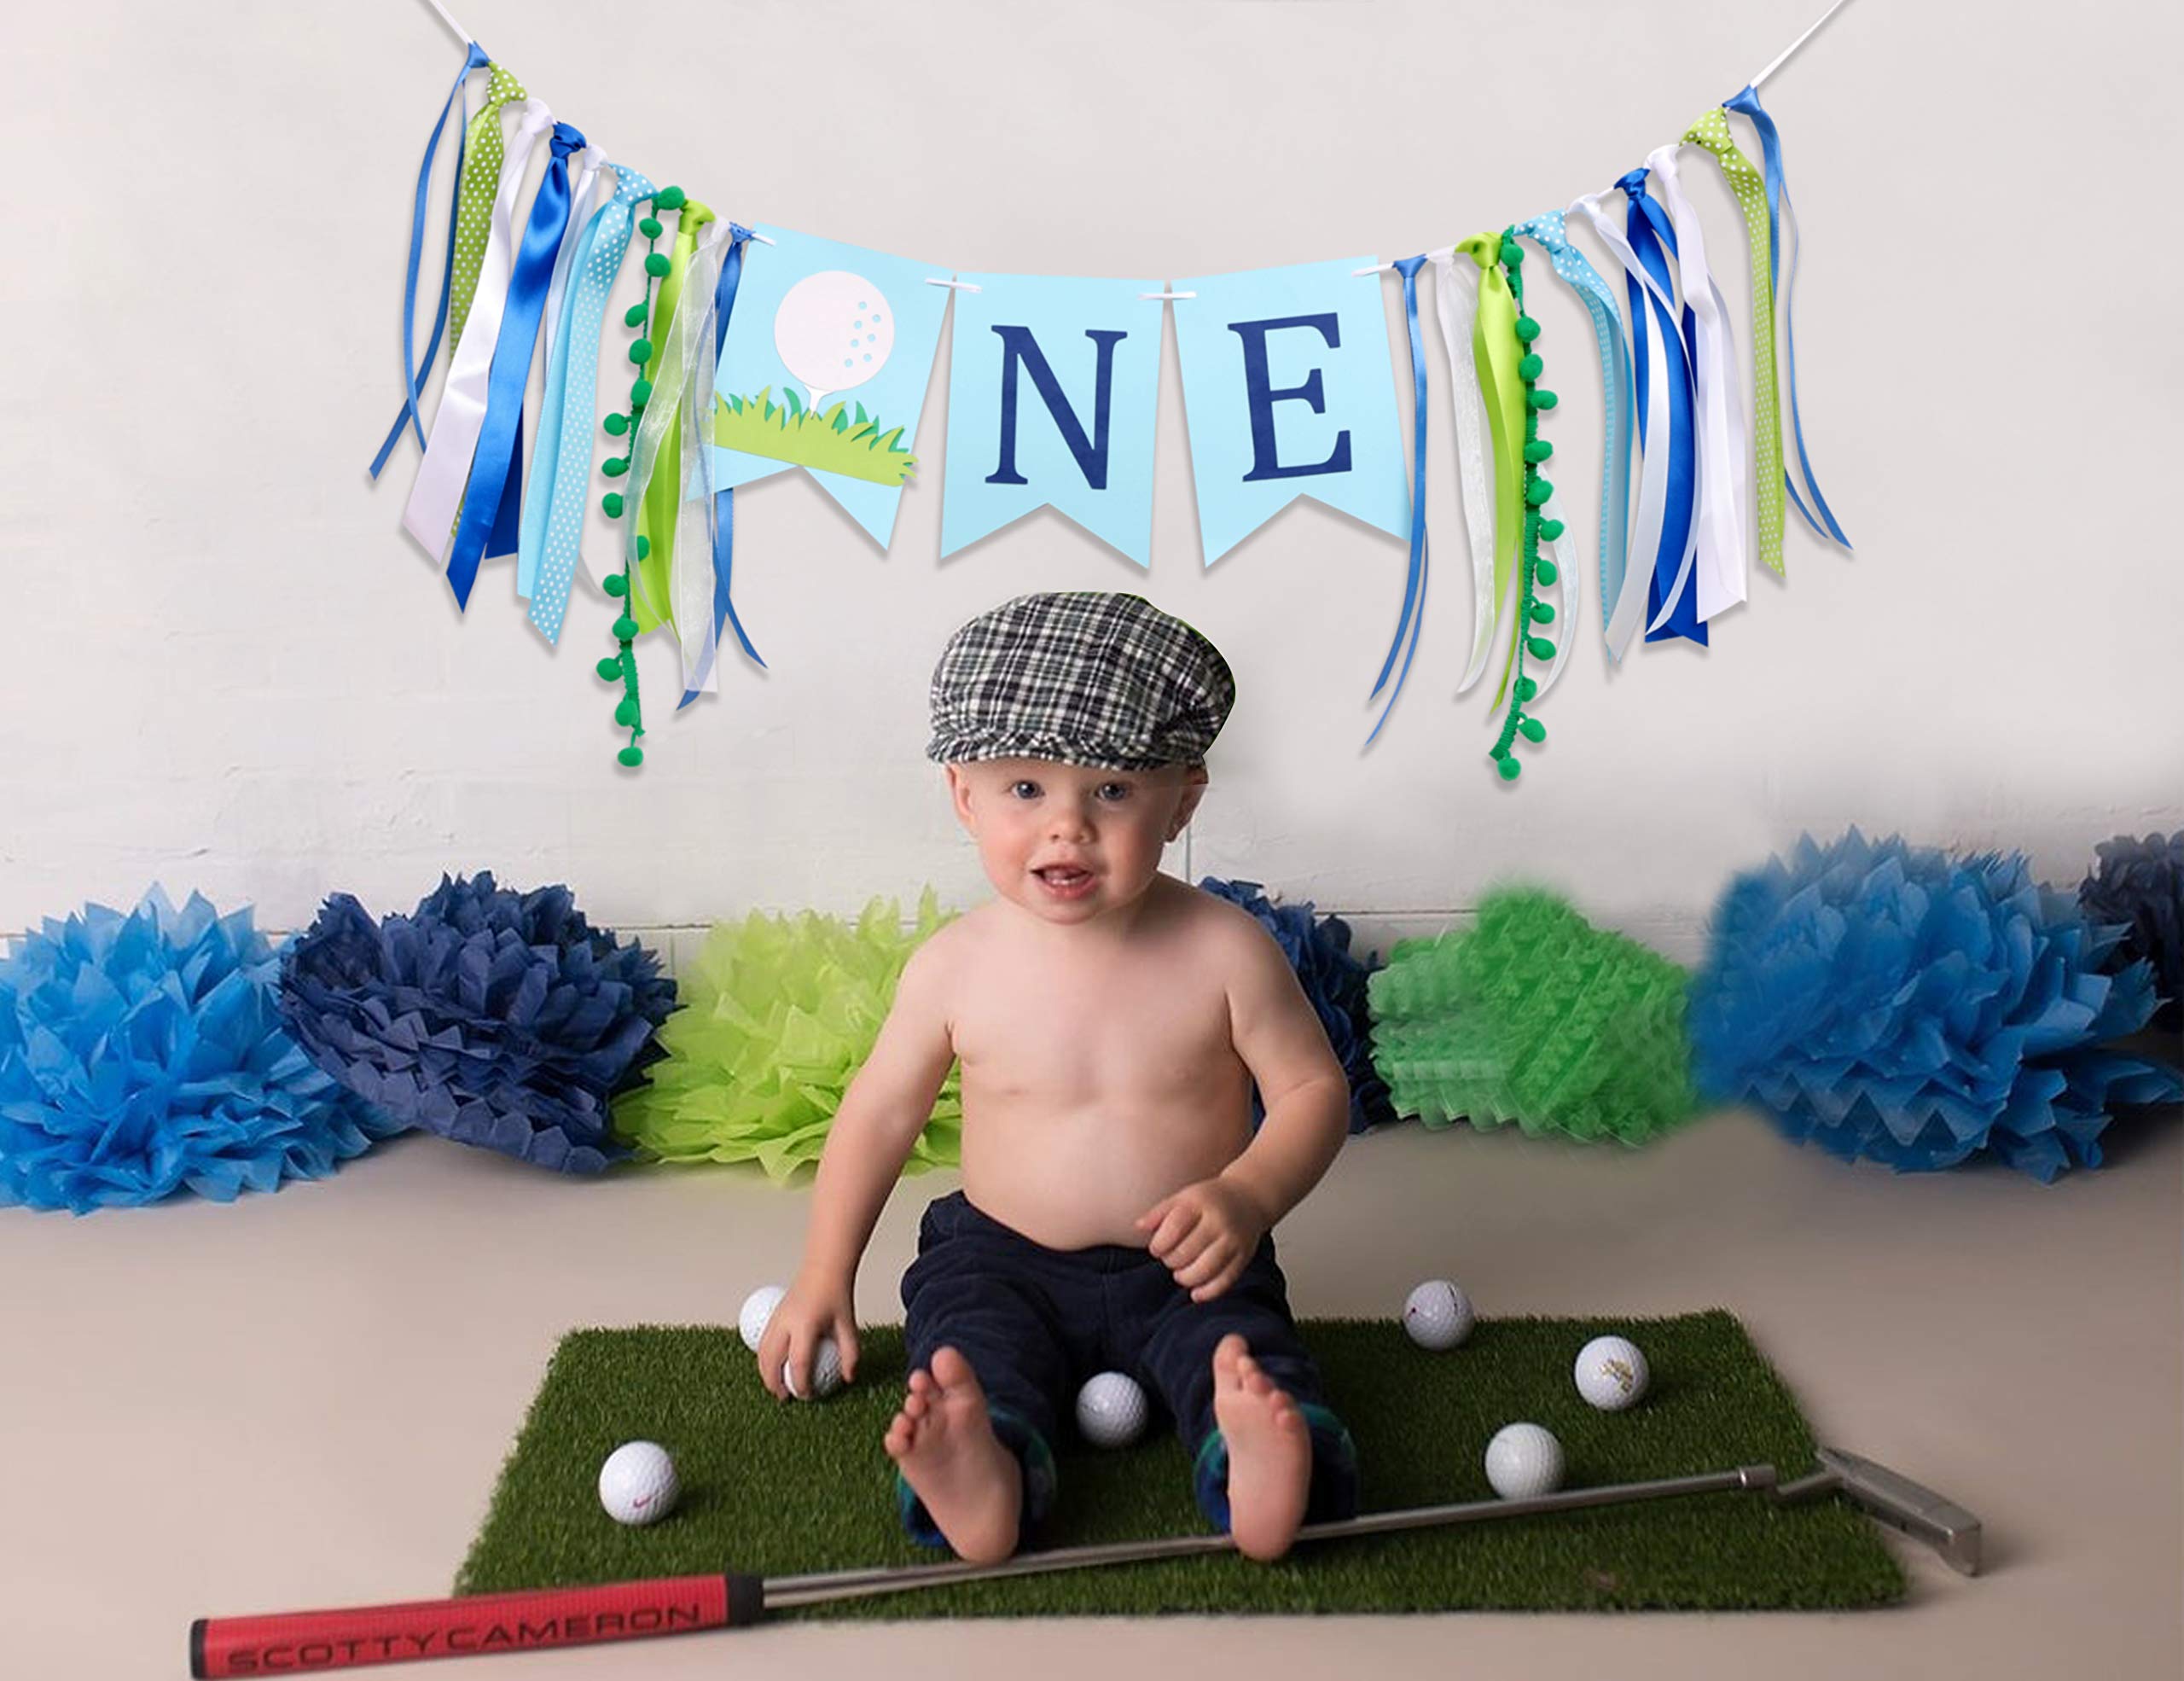 Golf 1st Birthday high Chair Banner - Golf 1st Birthday Party Decorations in one, Golf seat high Chair Banner, Birthday Party Banner, Cake Smashing, Photography Props.